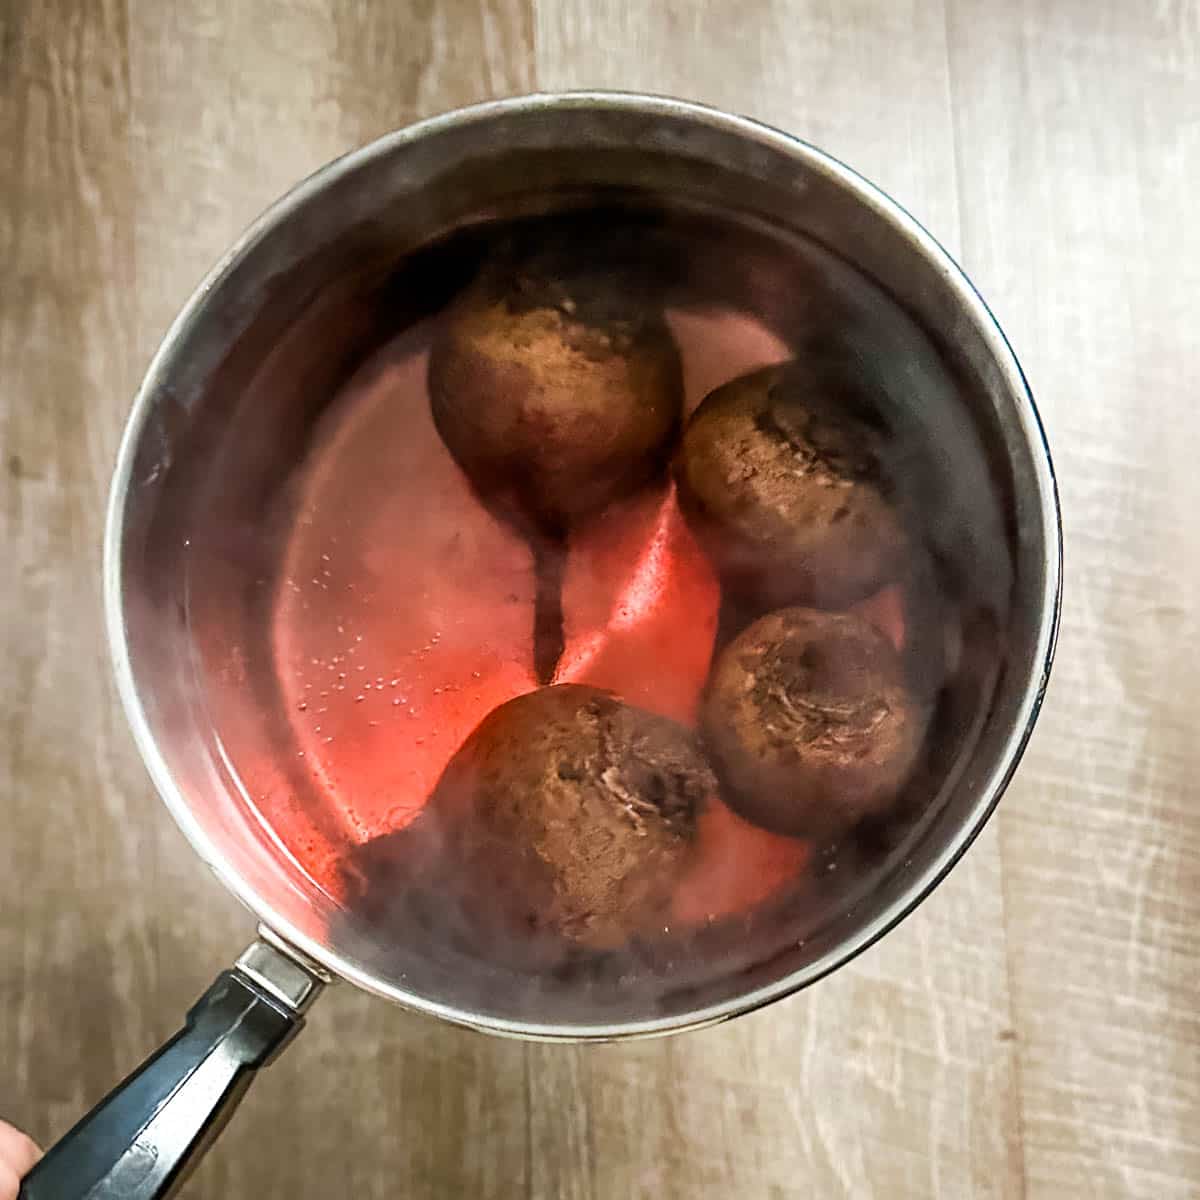 beets are placed in boiling water in a stainless steel pot.